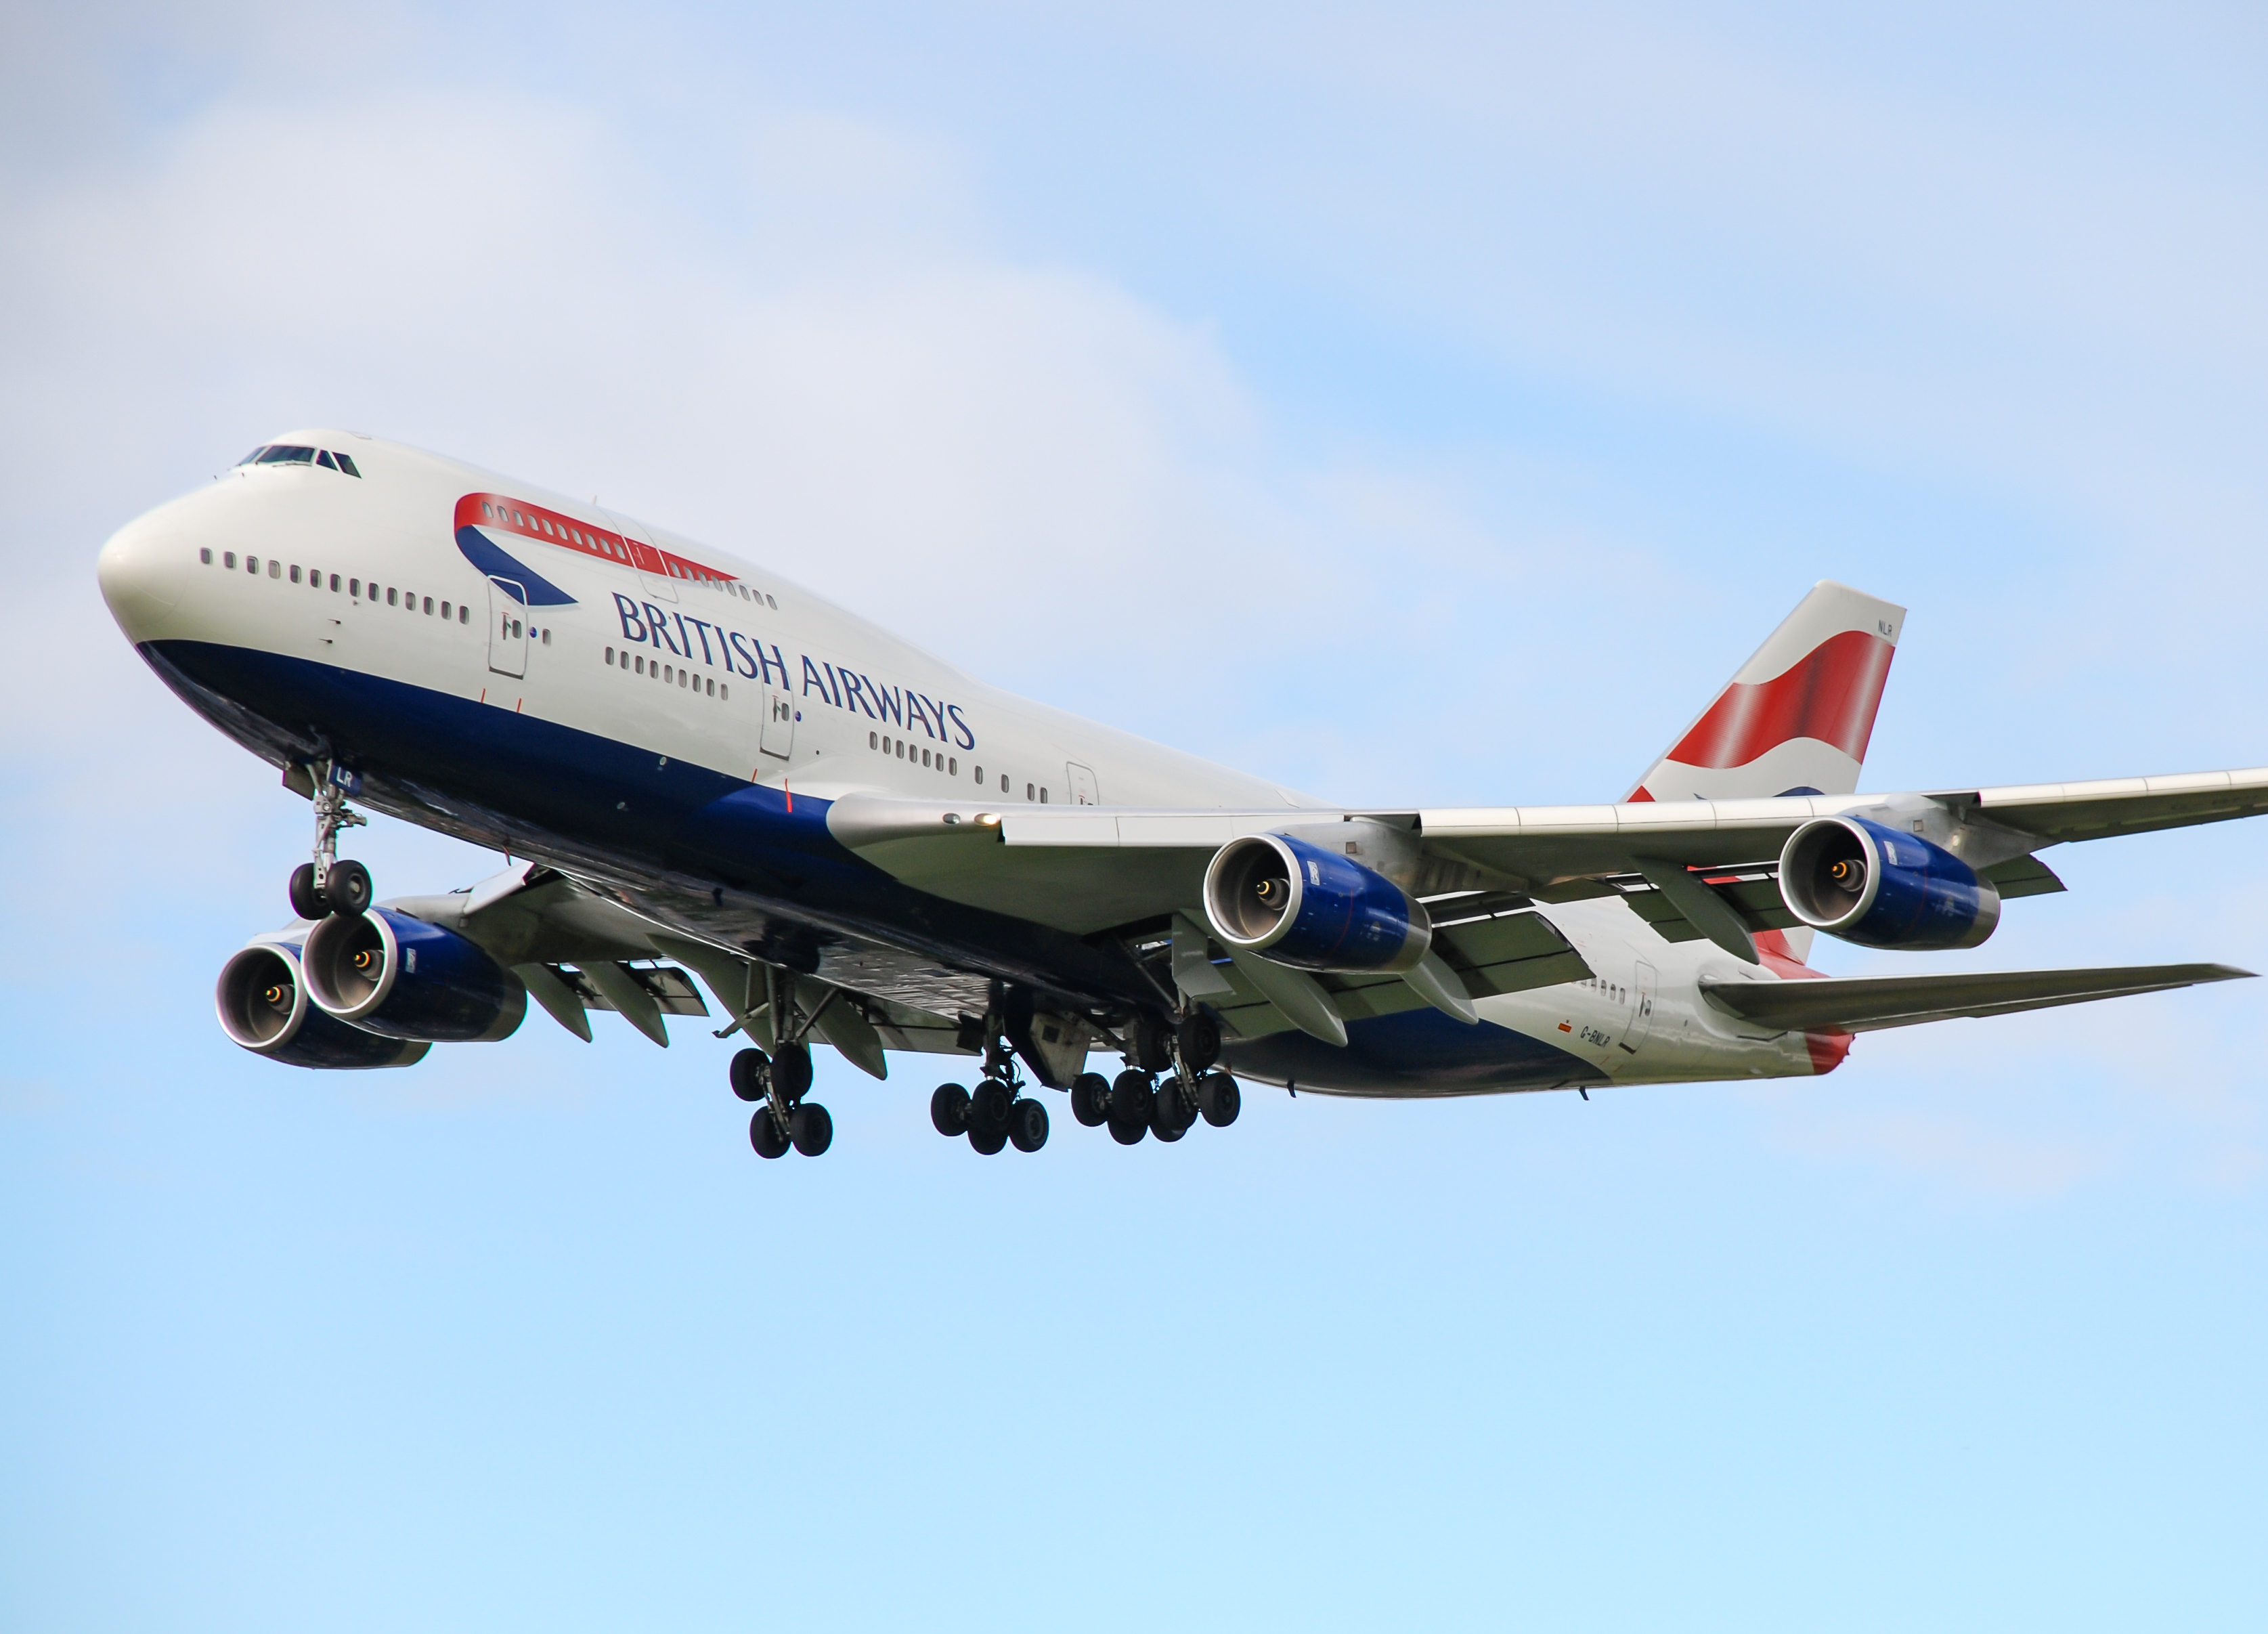 G-BNLR/GBNLR Withdrawn from use Boeing 747 Airframe Information - AVSpotters.com